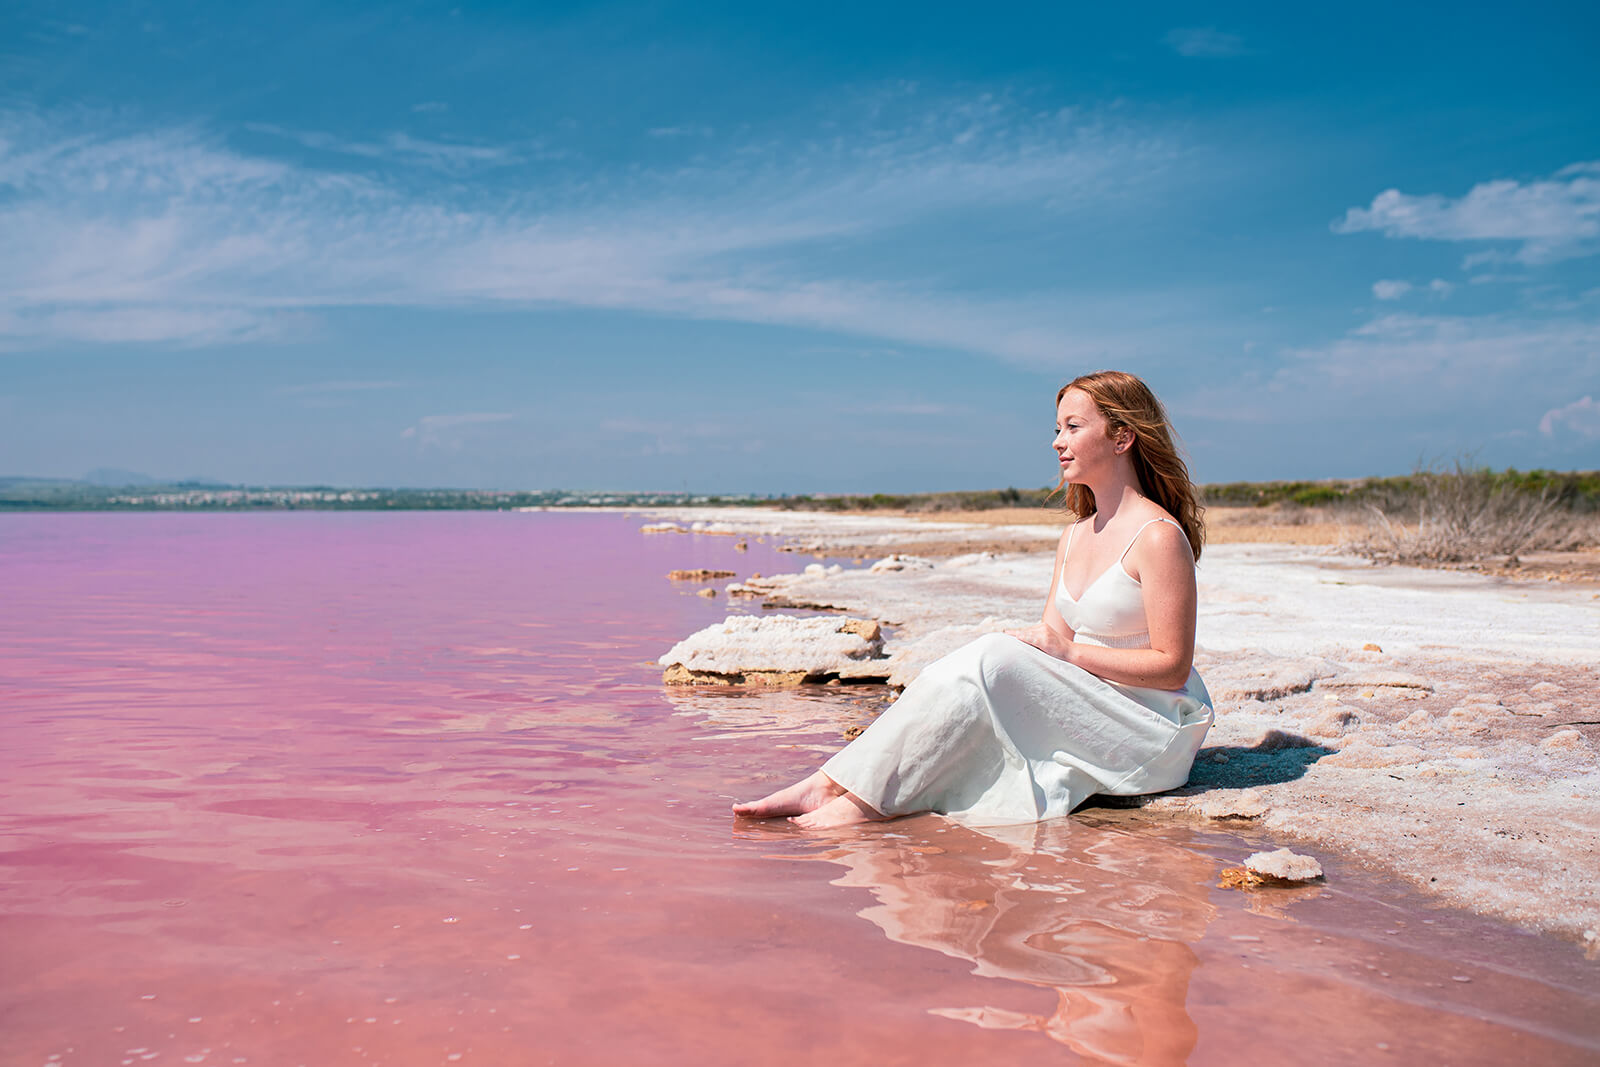 Taking a Trip to the Pinkest Lake in the World